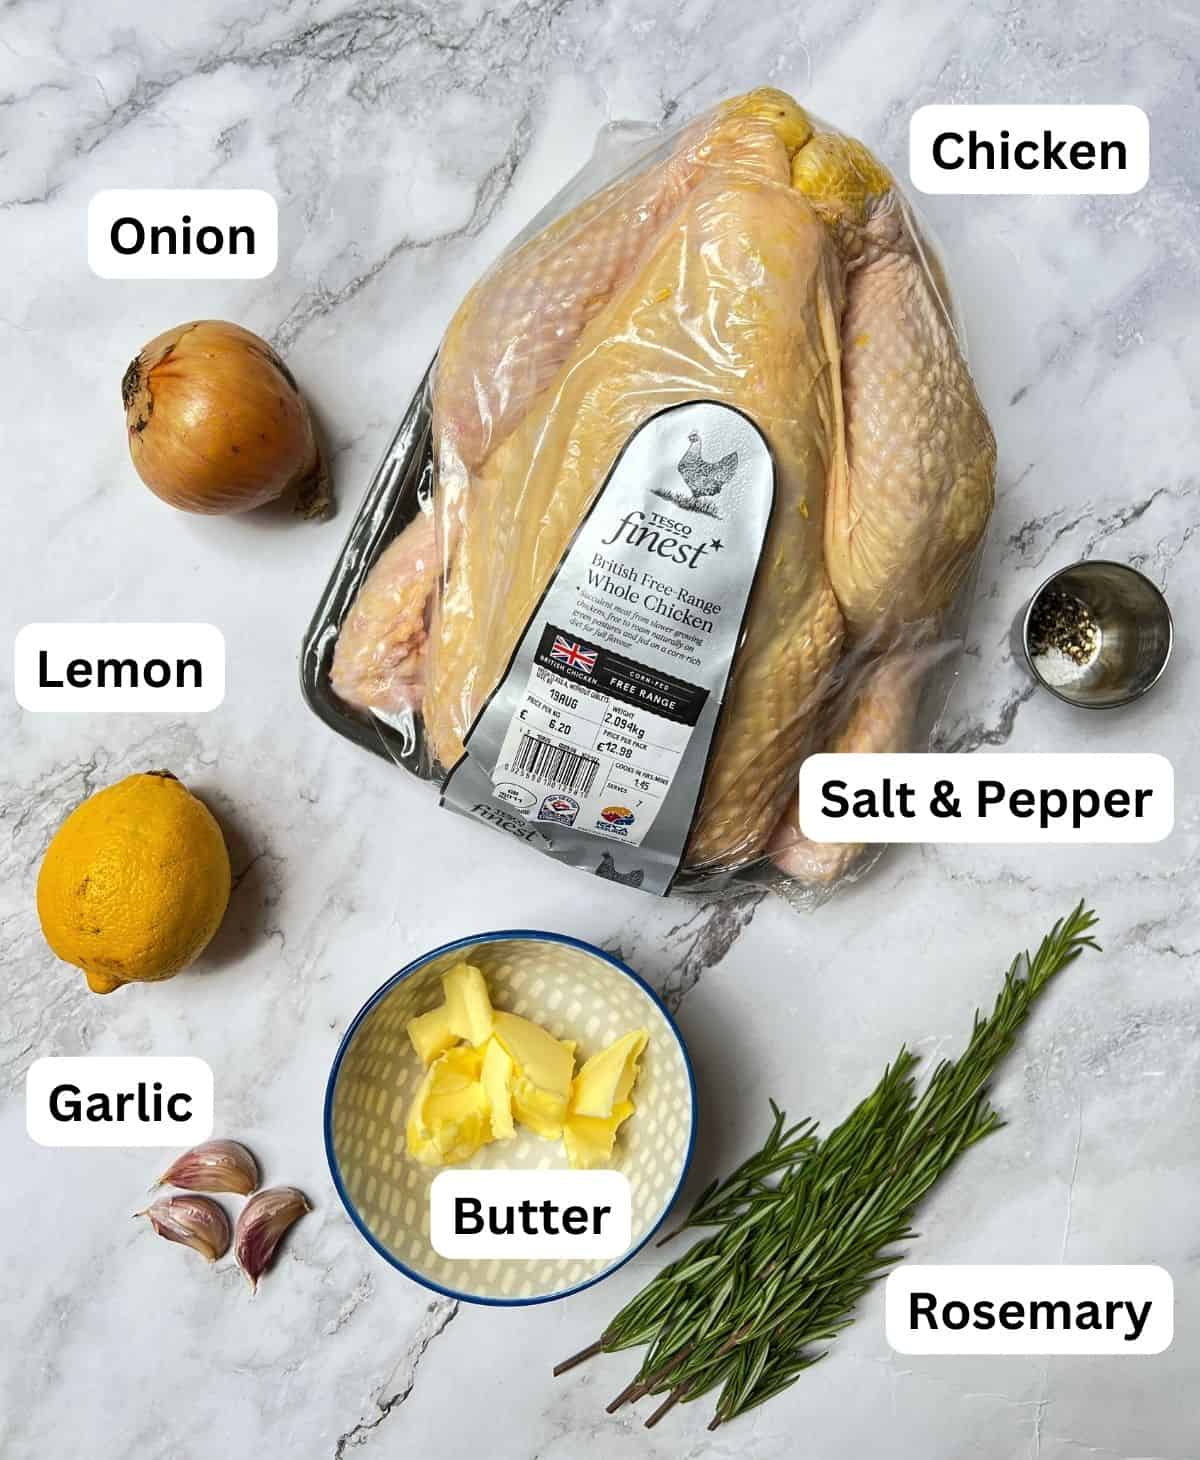 Ingredients laid out for roast chicken with garlic, lemon and rosemary.